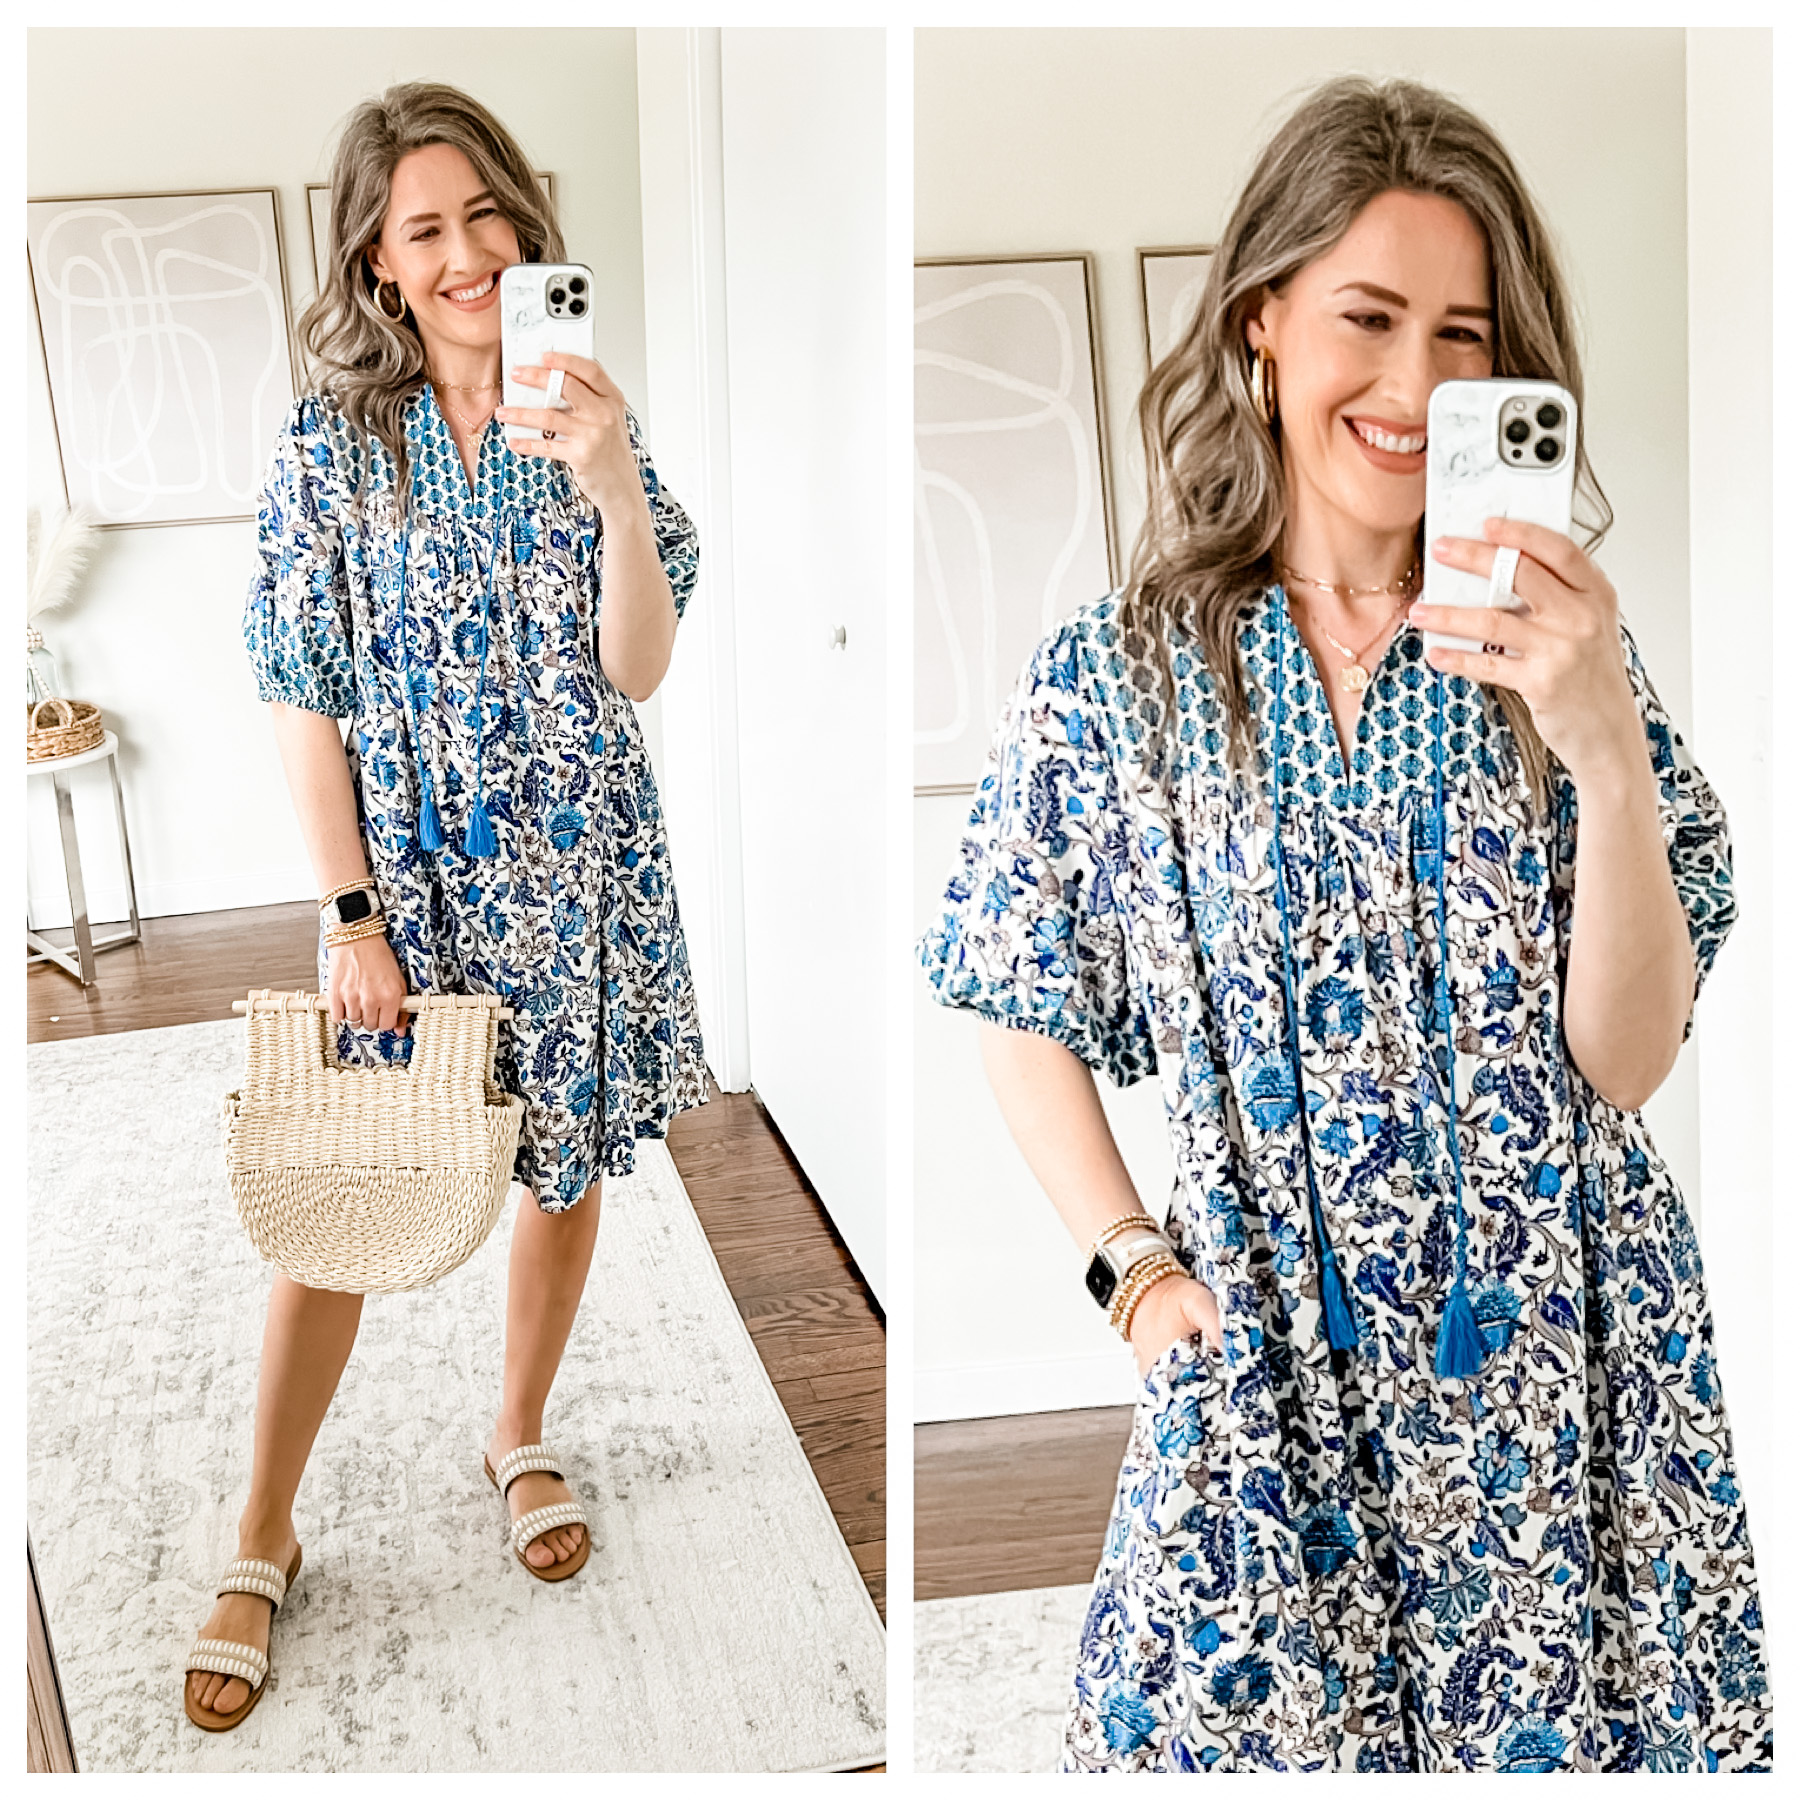 Target Tuesday Try-On, spring dresses and sandals on sale